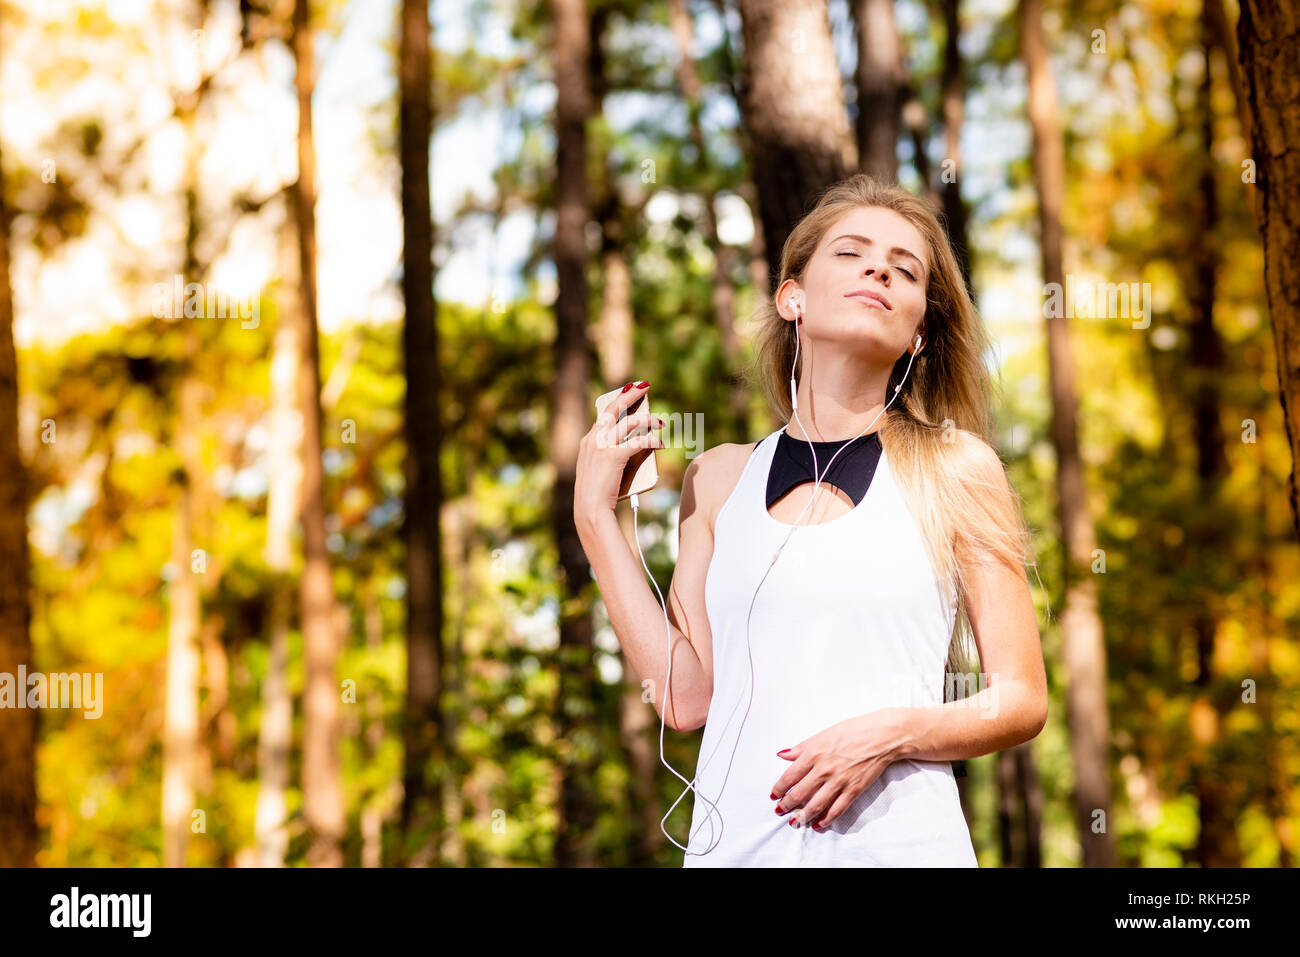 Beautiful blonde model in gym clothes listening to music on her cell phone. Blurred forest background at sunset Stock Photo